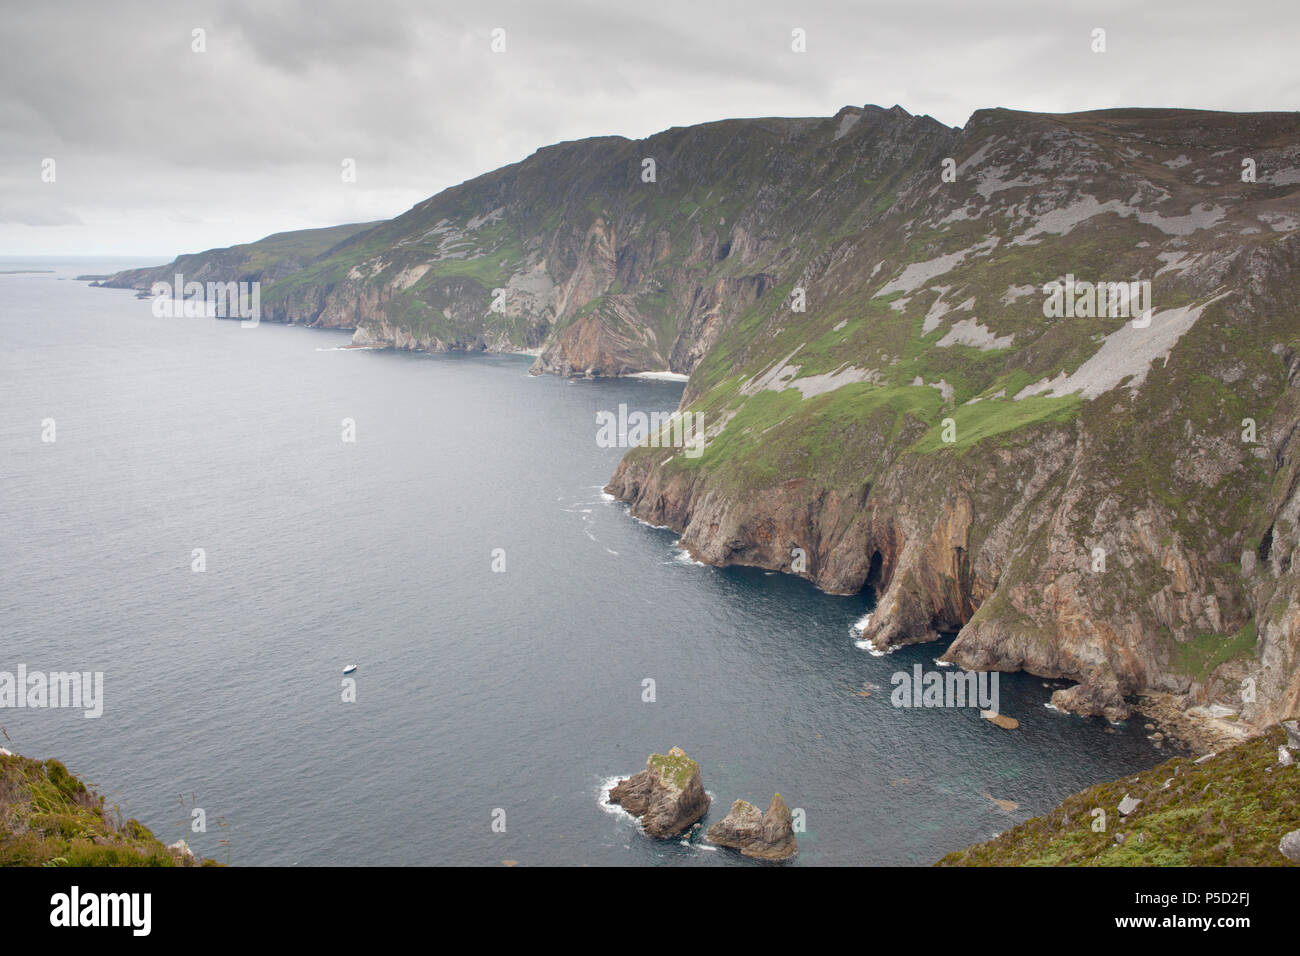 Slieve League Mountain has some of Ireland's highest sea cliffs at 609m. They drop away into the Atlantic Ocean on the coast of Donegal Stock Photo